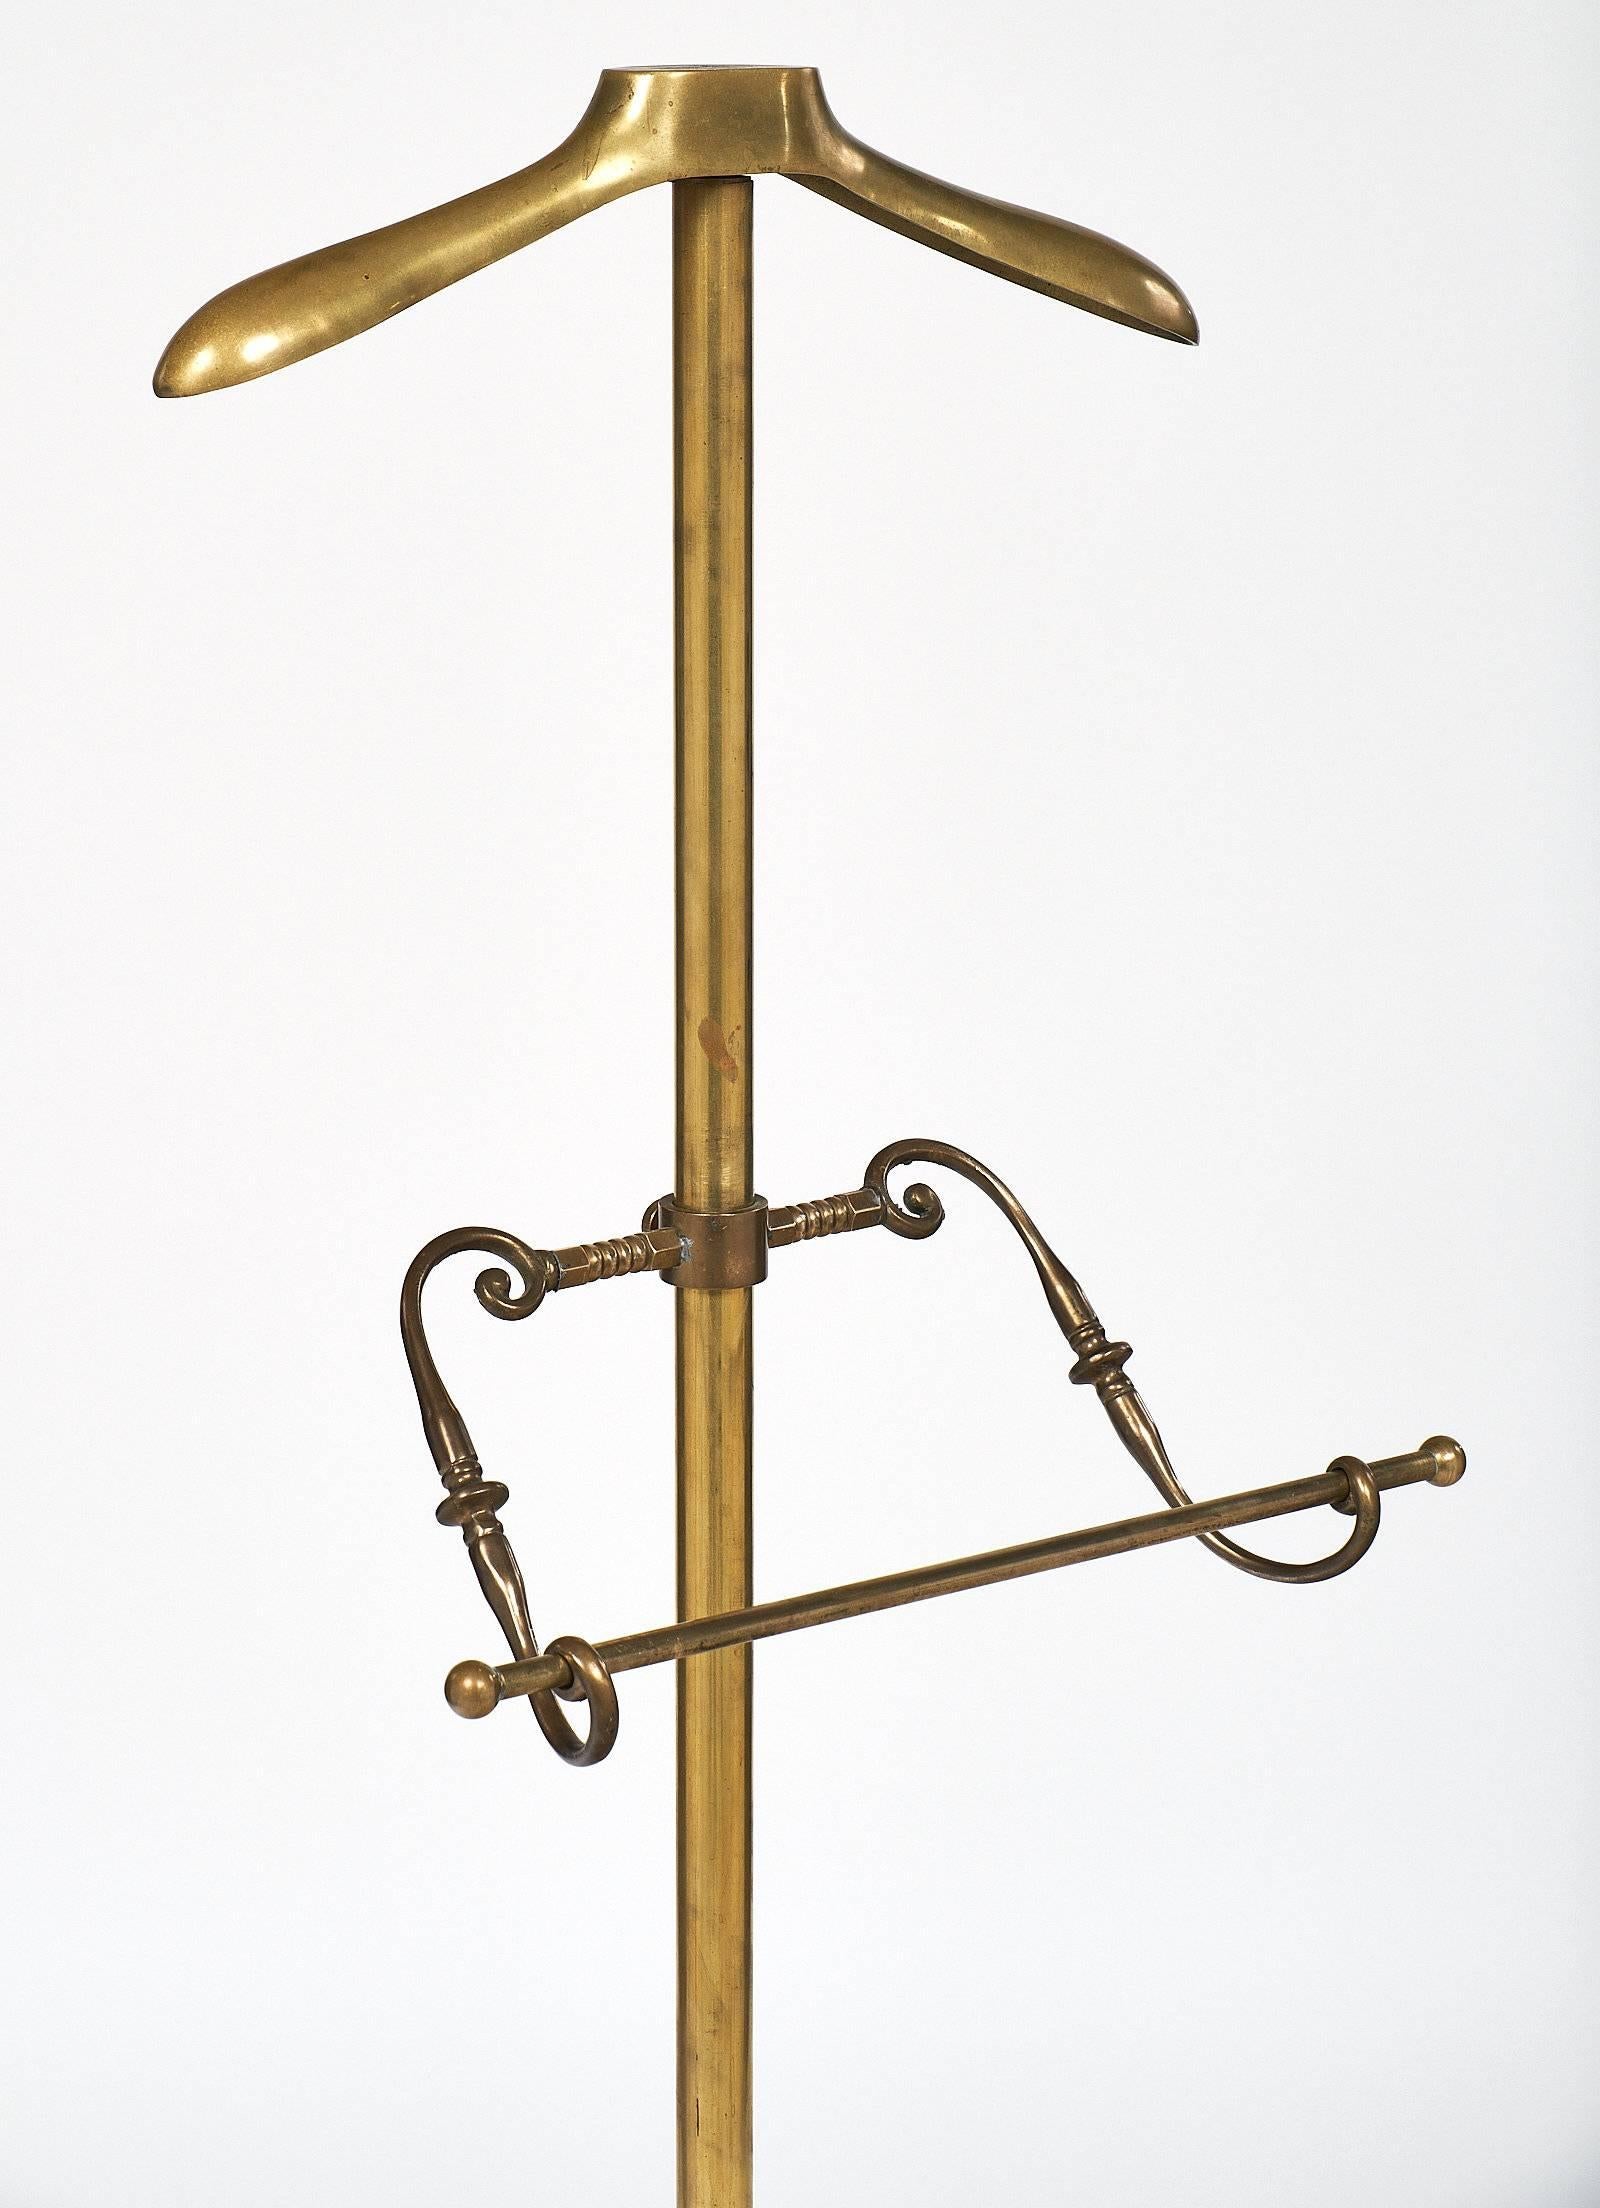 French vintage brass valet. The centre stem ends with a hanger at the top, and at waist height is a towel rack. The base features an embossed plate with tripod feet.